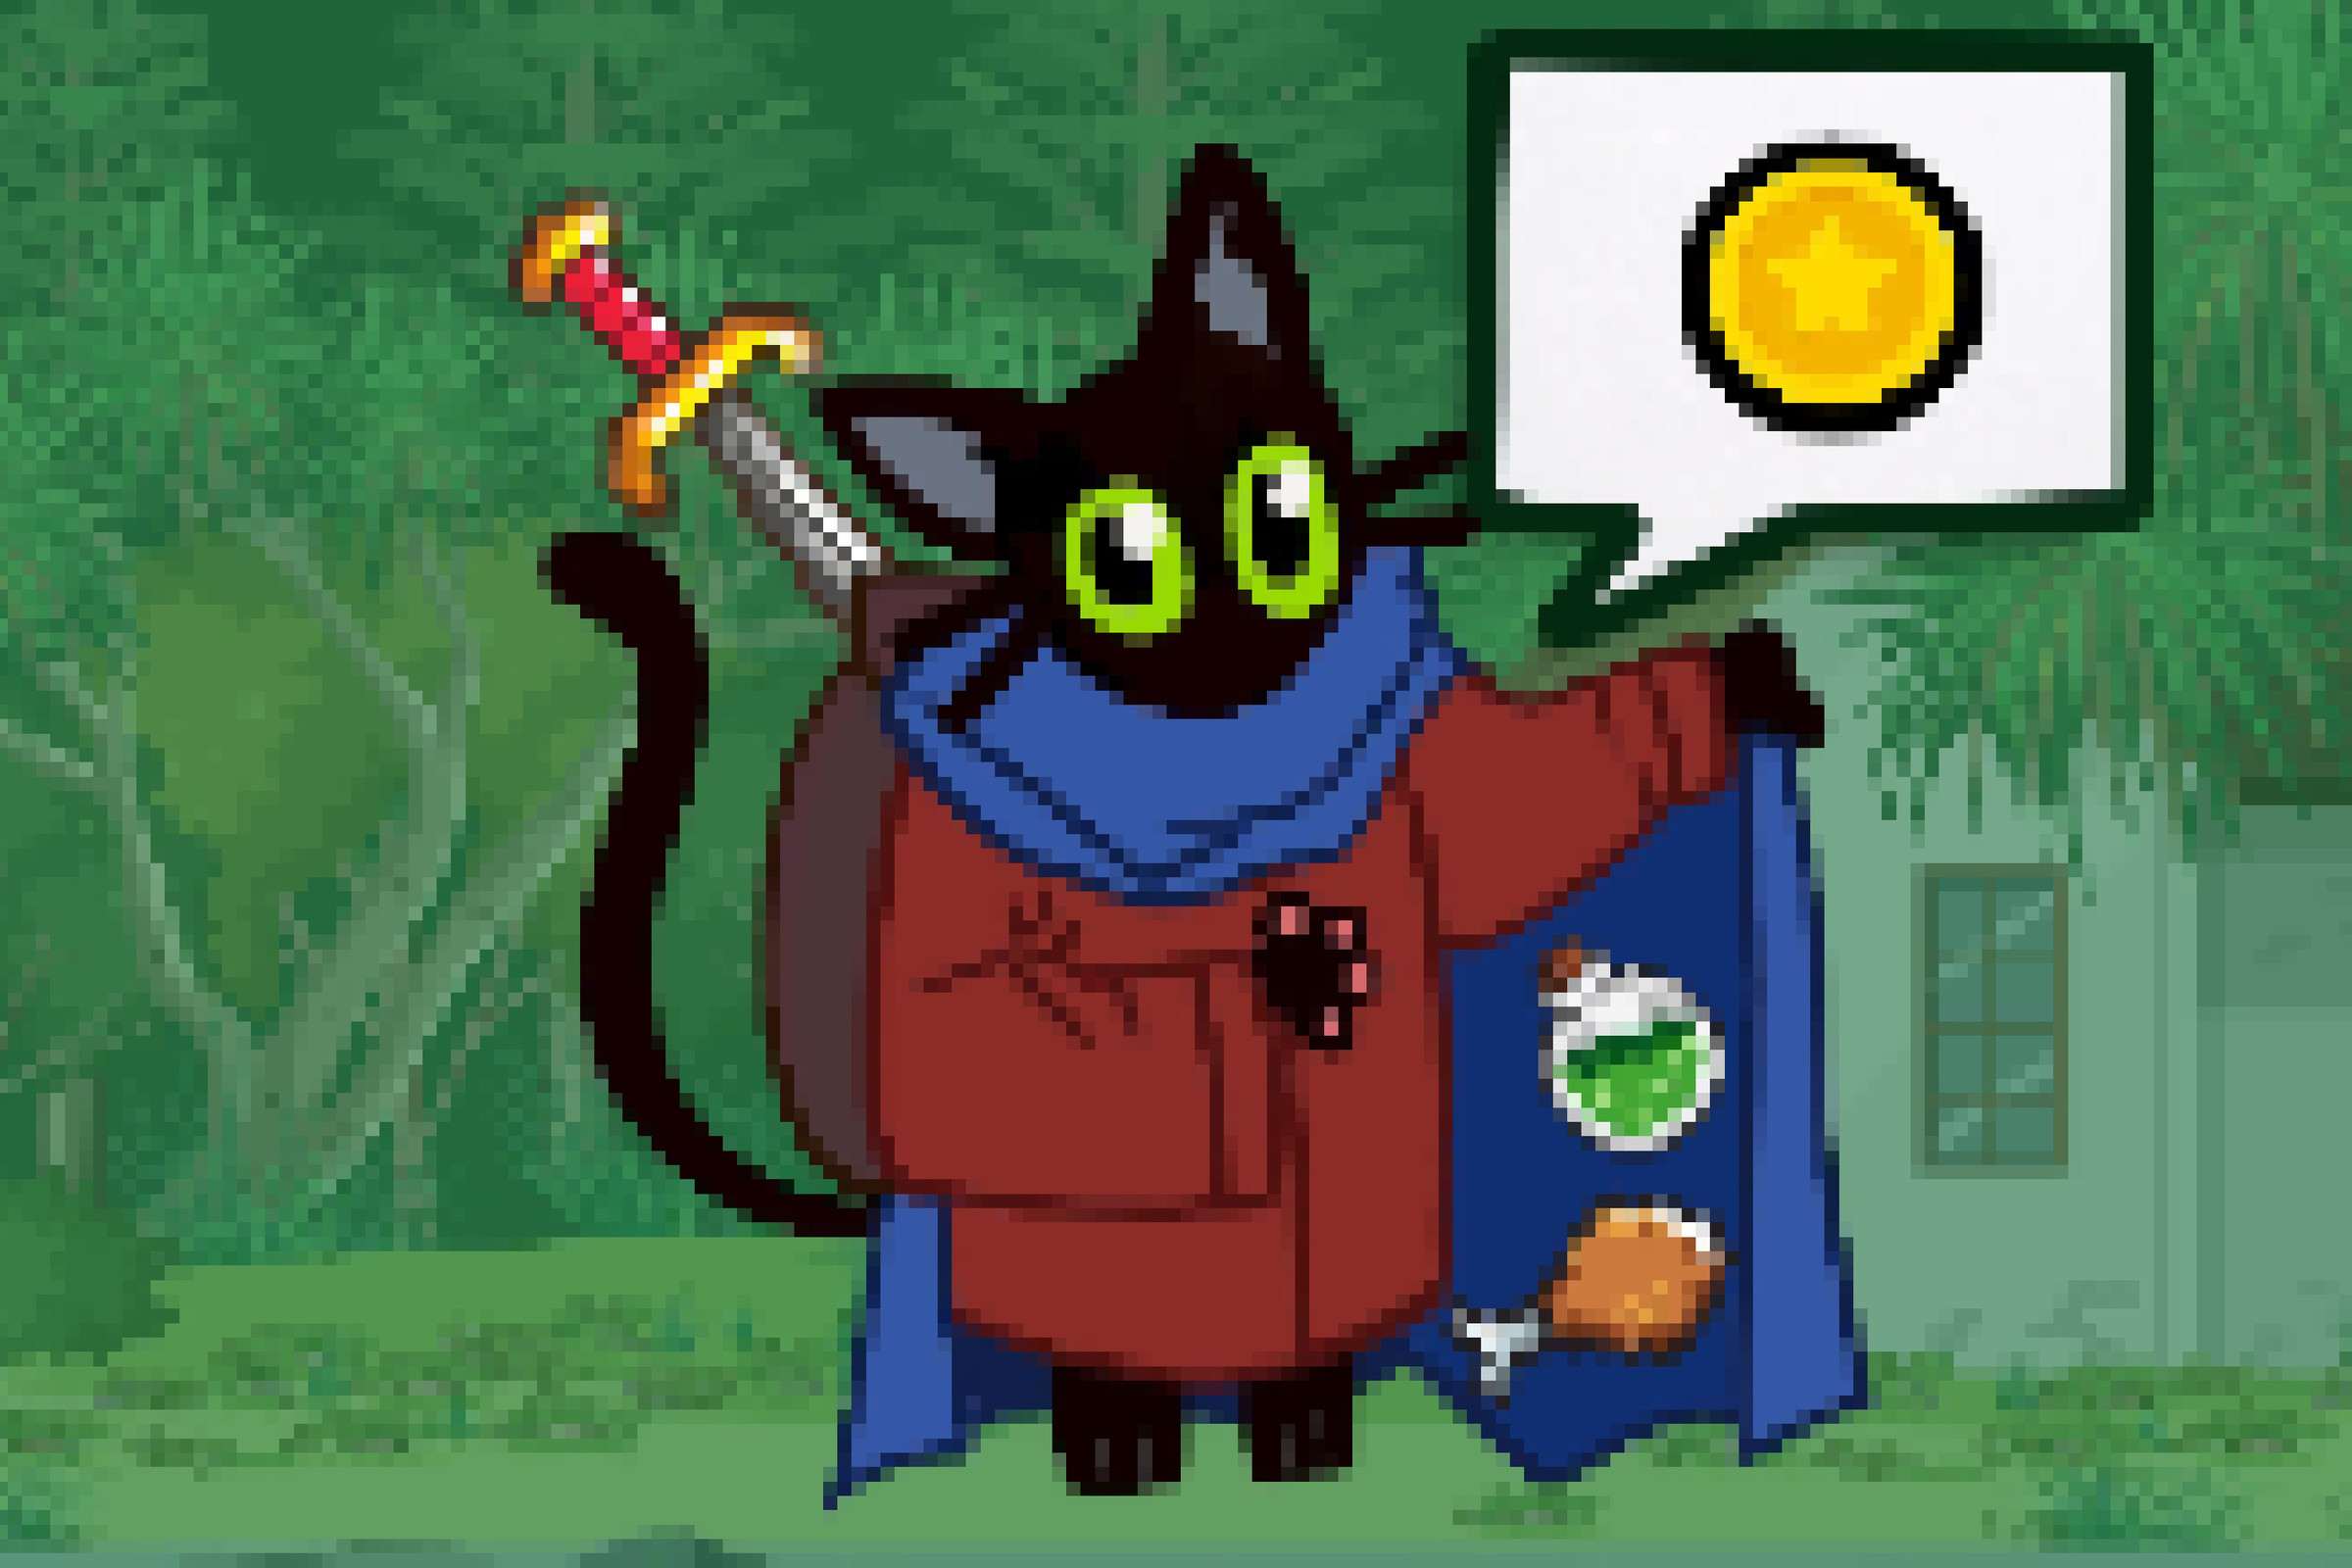 A pixelart cat merchent in the woodlands. He has a sword on his back and potions or a chicken leg to sell. He is asking for a dabloon.